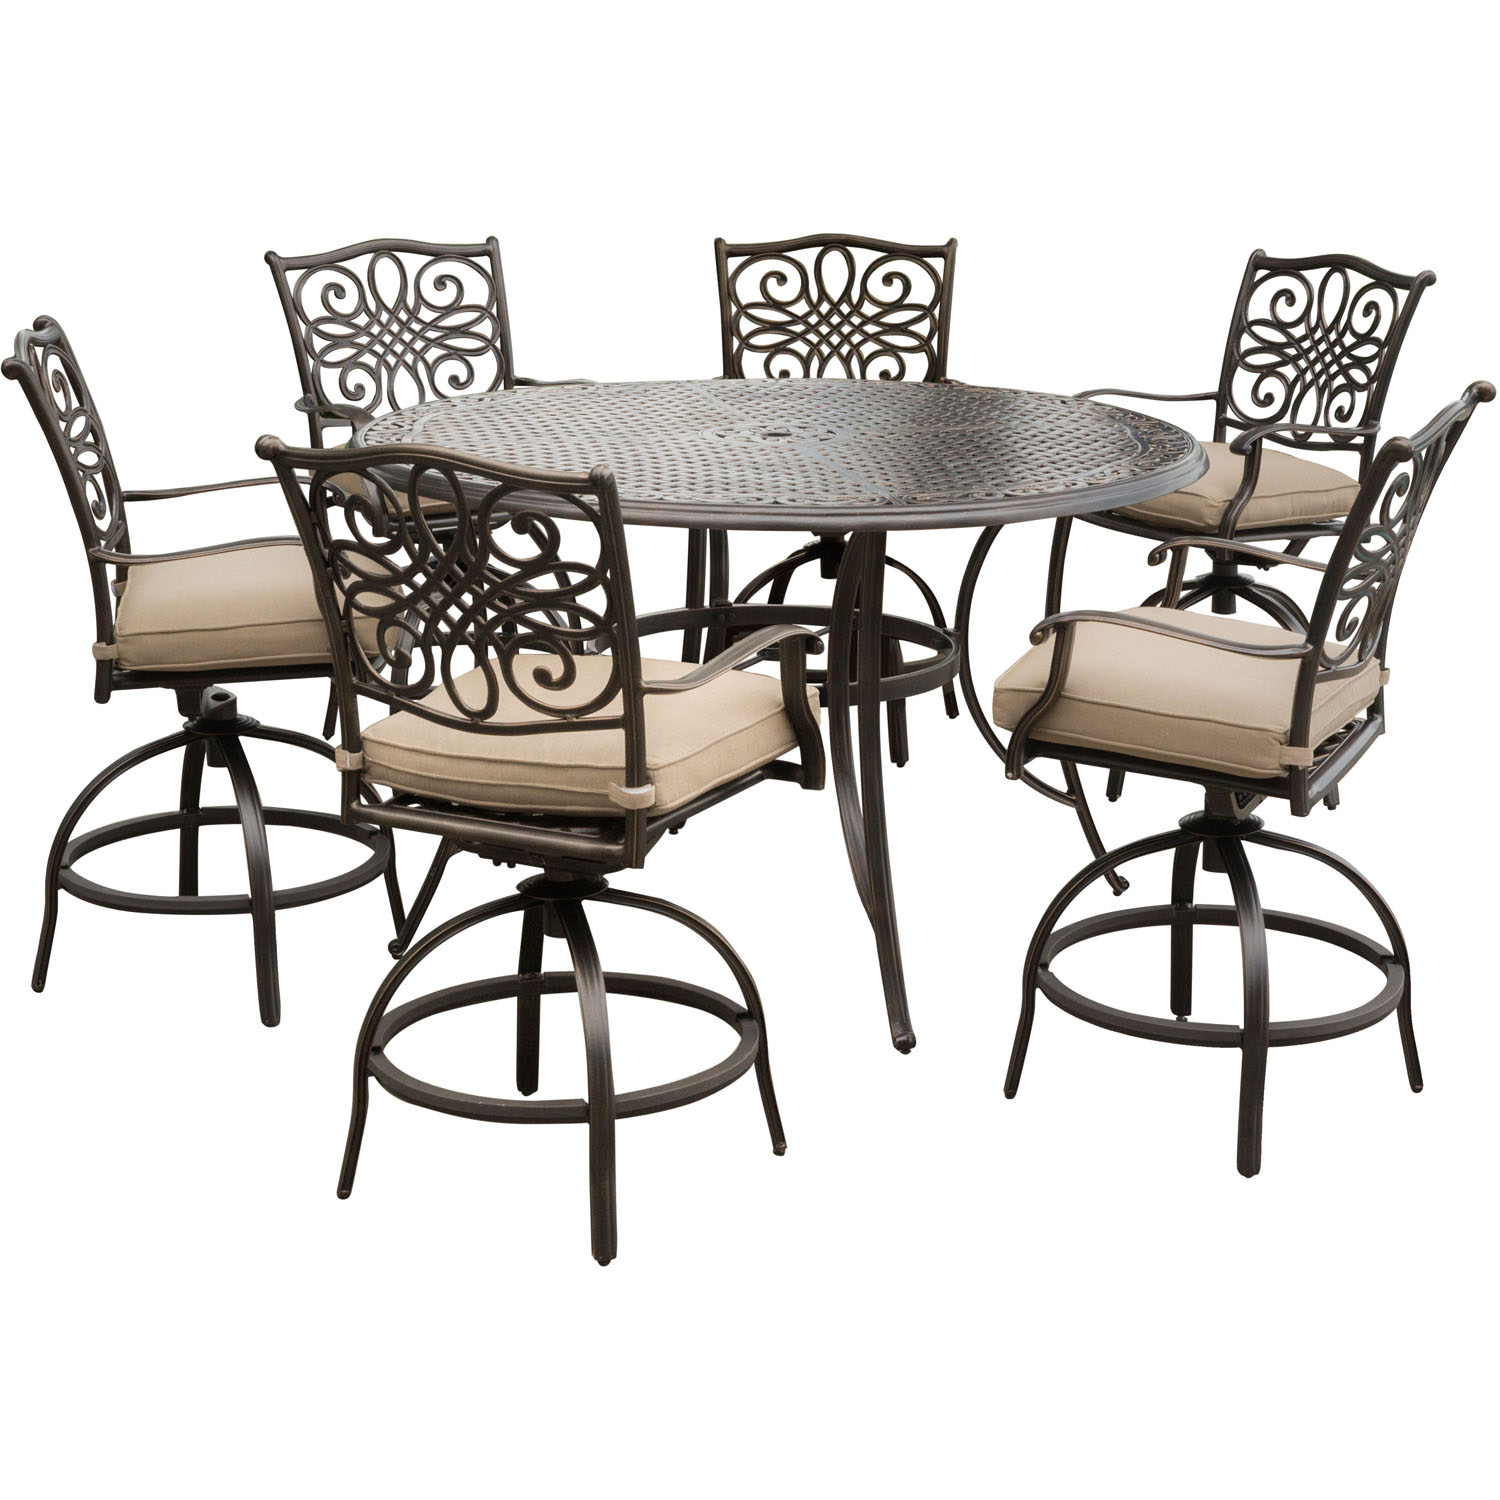 Hanover Traditions 7-Piece Rust-Free Aluminum with Tan Cushions, 6 Counter-Height Swivel Chairs and Aluminum Round Bar Table Table, TRADDN7PCBR - image 1 of 19